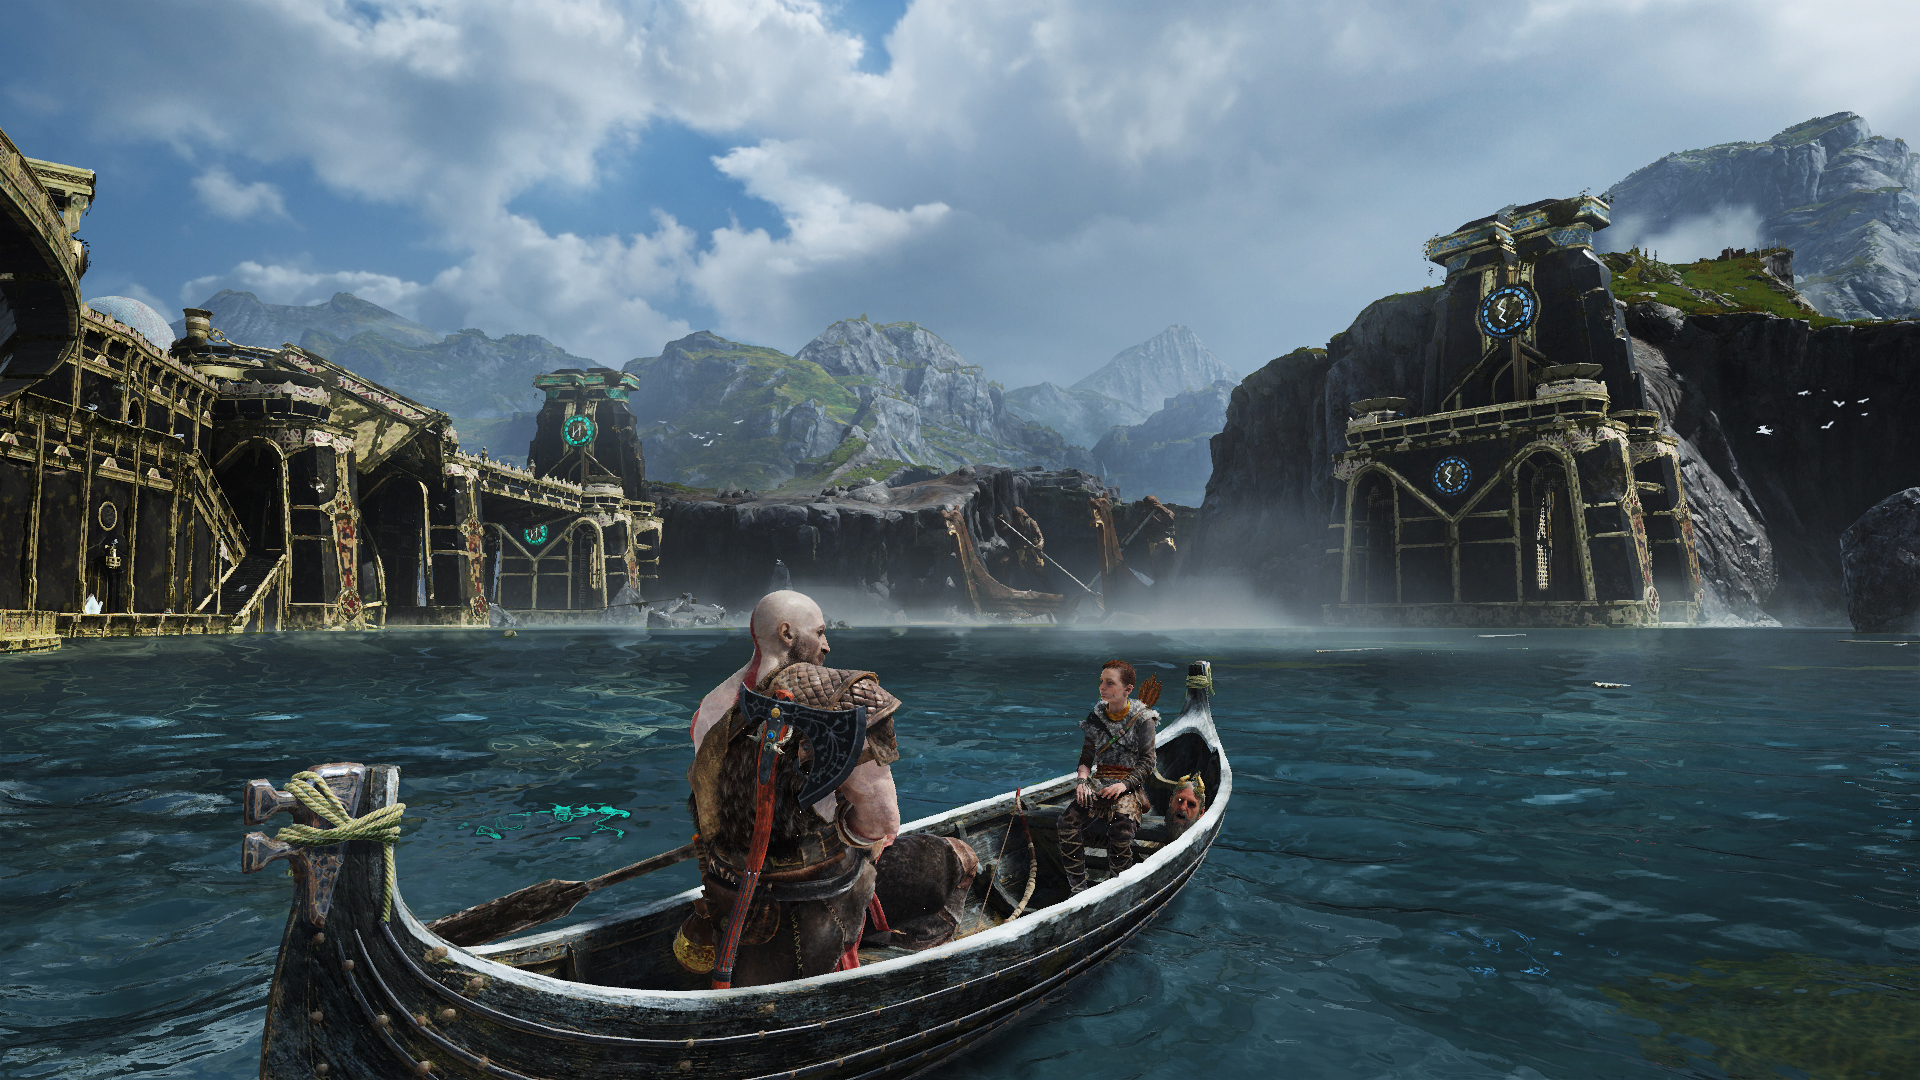 God of War is now available DRM-free on PC, and at half-price